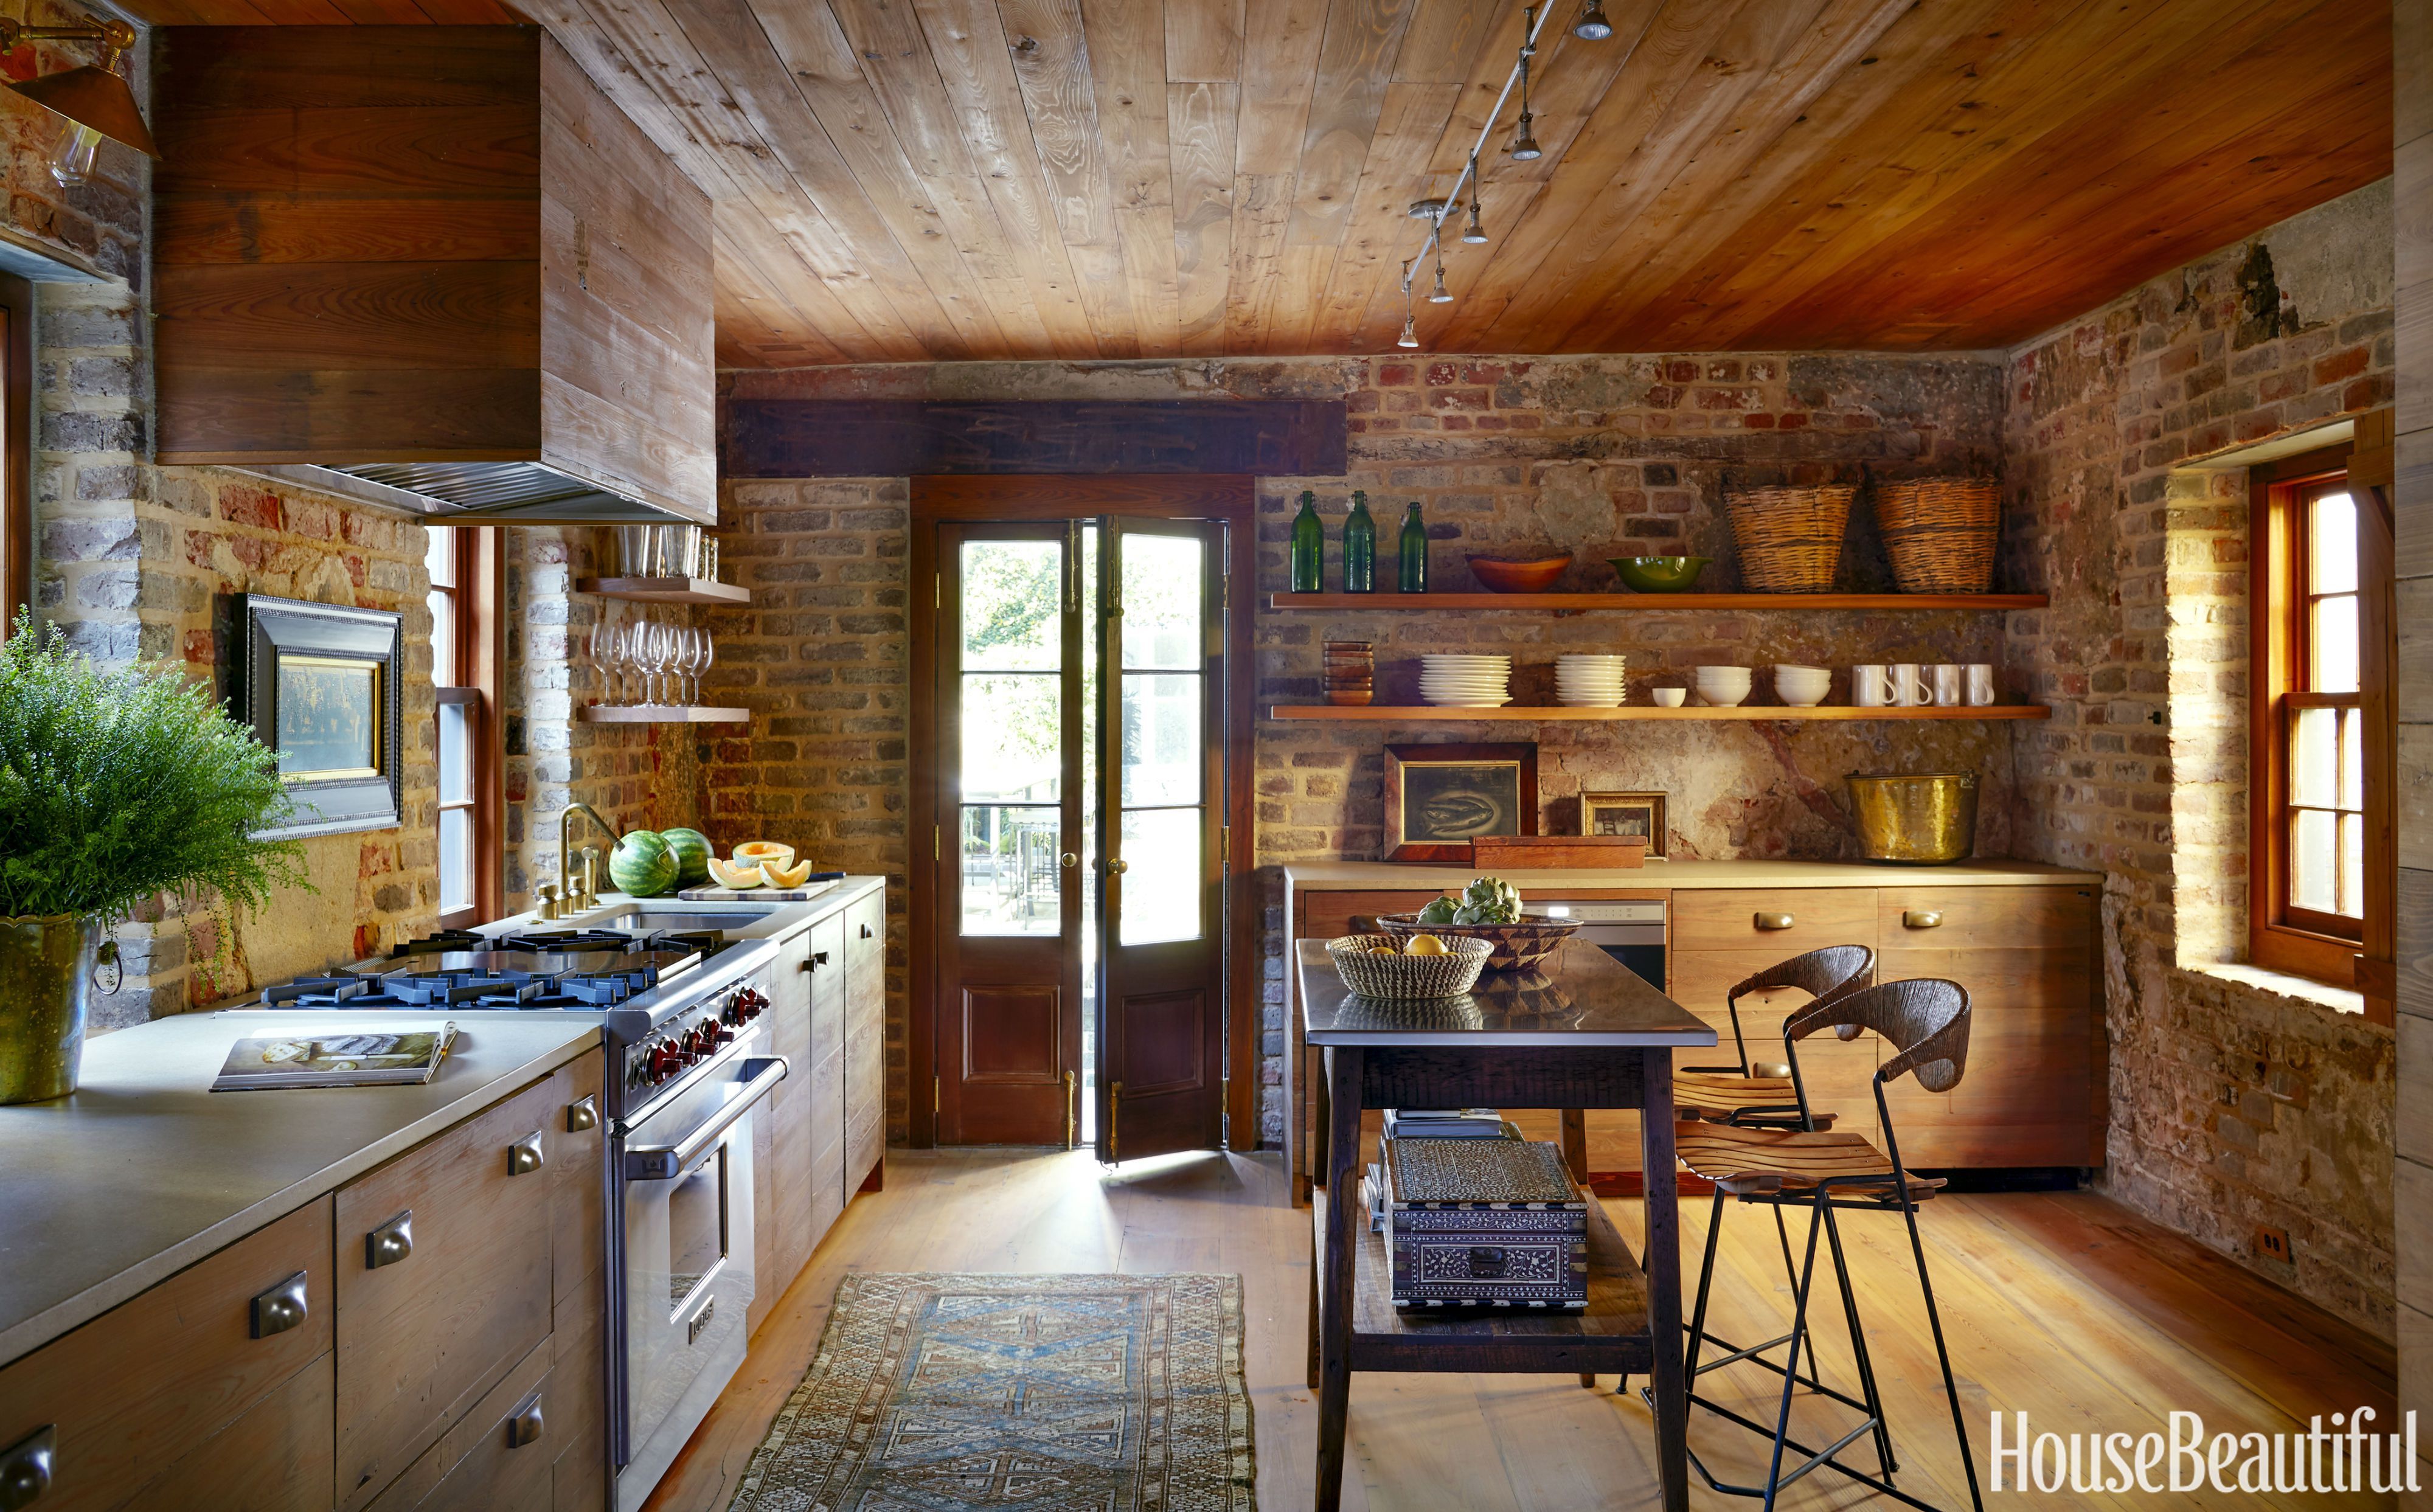 Rustic Kitchens: What Are They and What Makes Them So Amazing